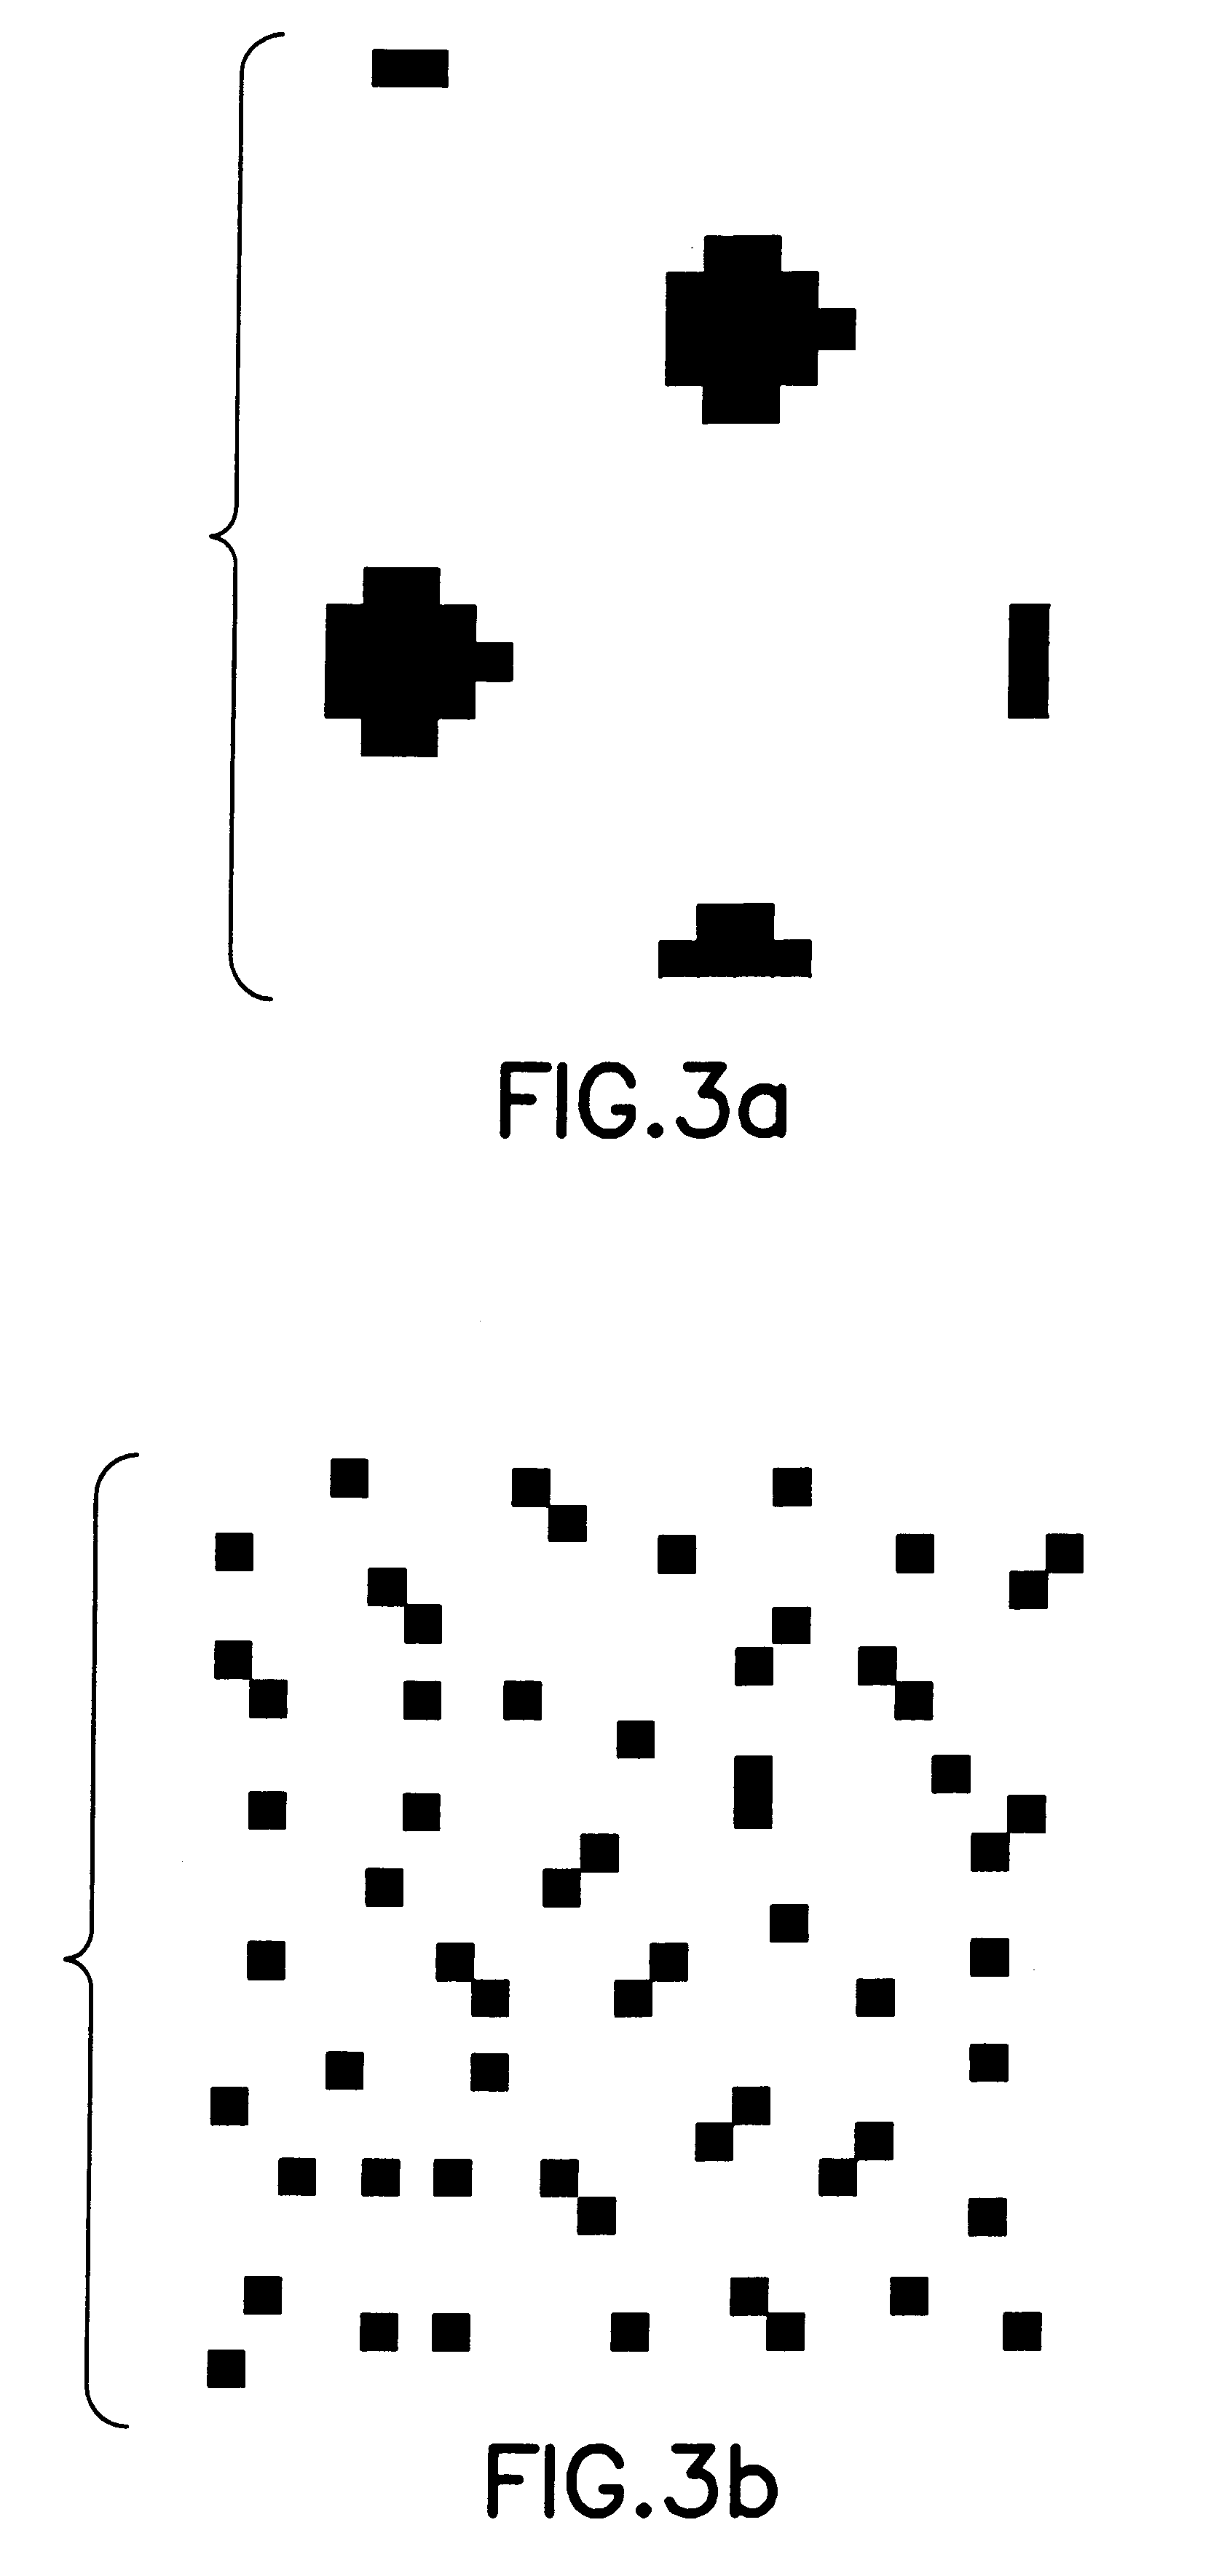 Electrophotographic device, electrophotography, and process for preparing sheet bearing toner images